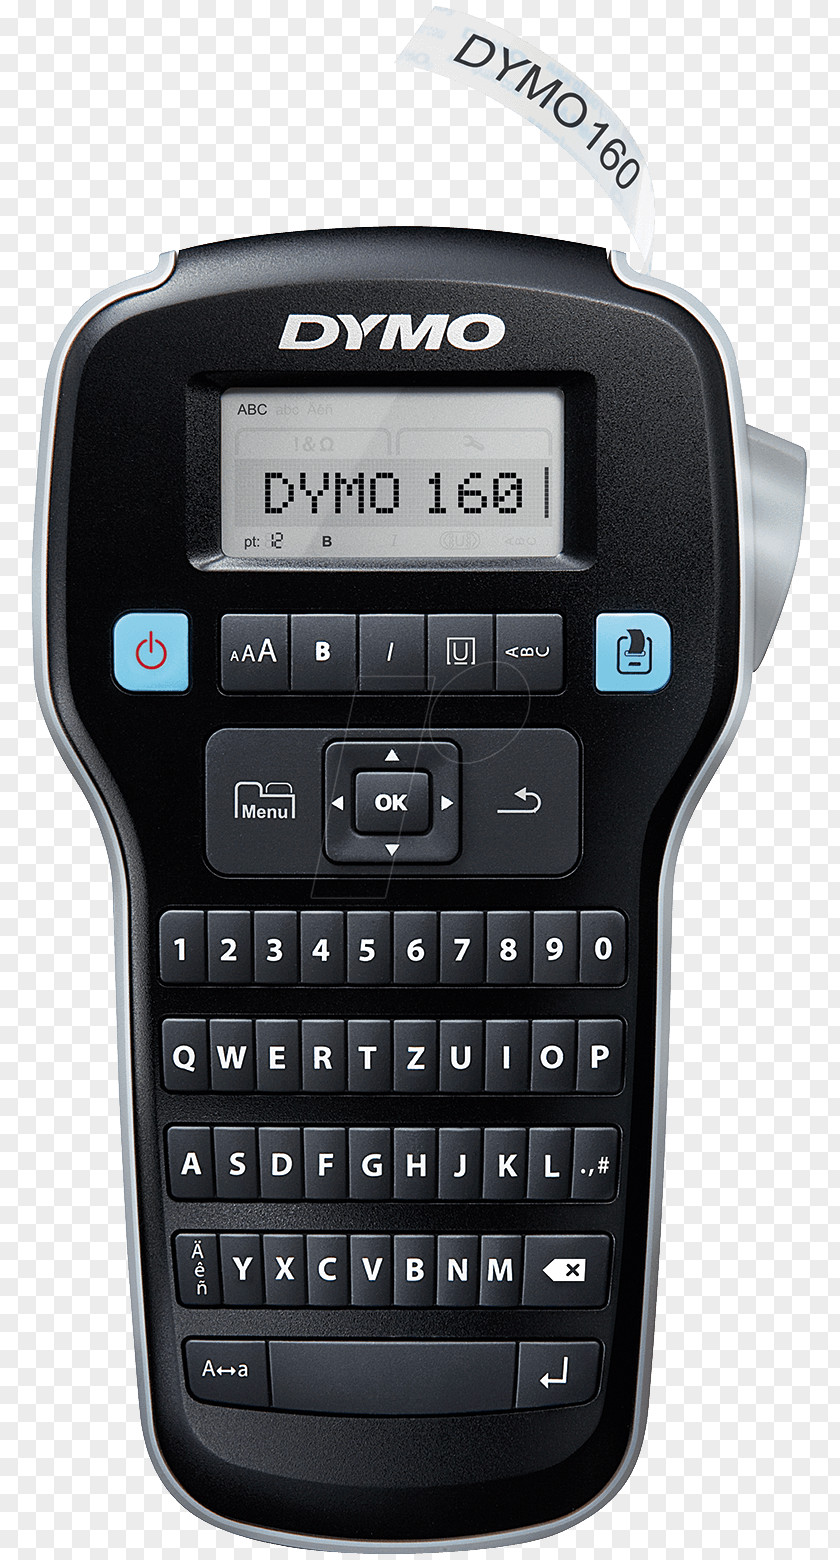 Lm Paper DYMO BVBA Dymo LabelManager 160 Label Printer PNG